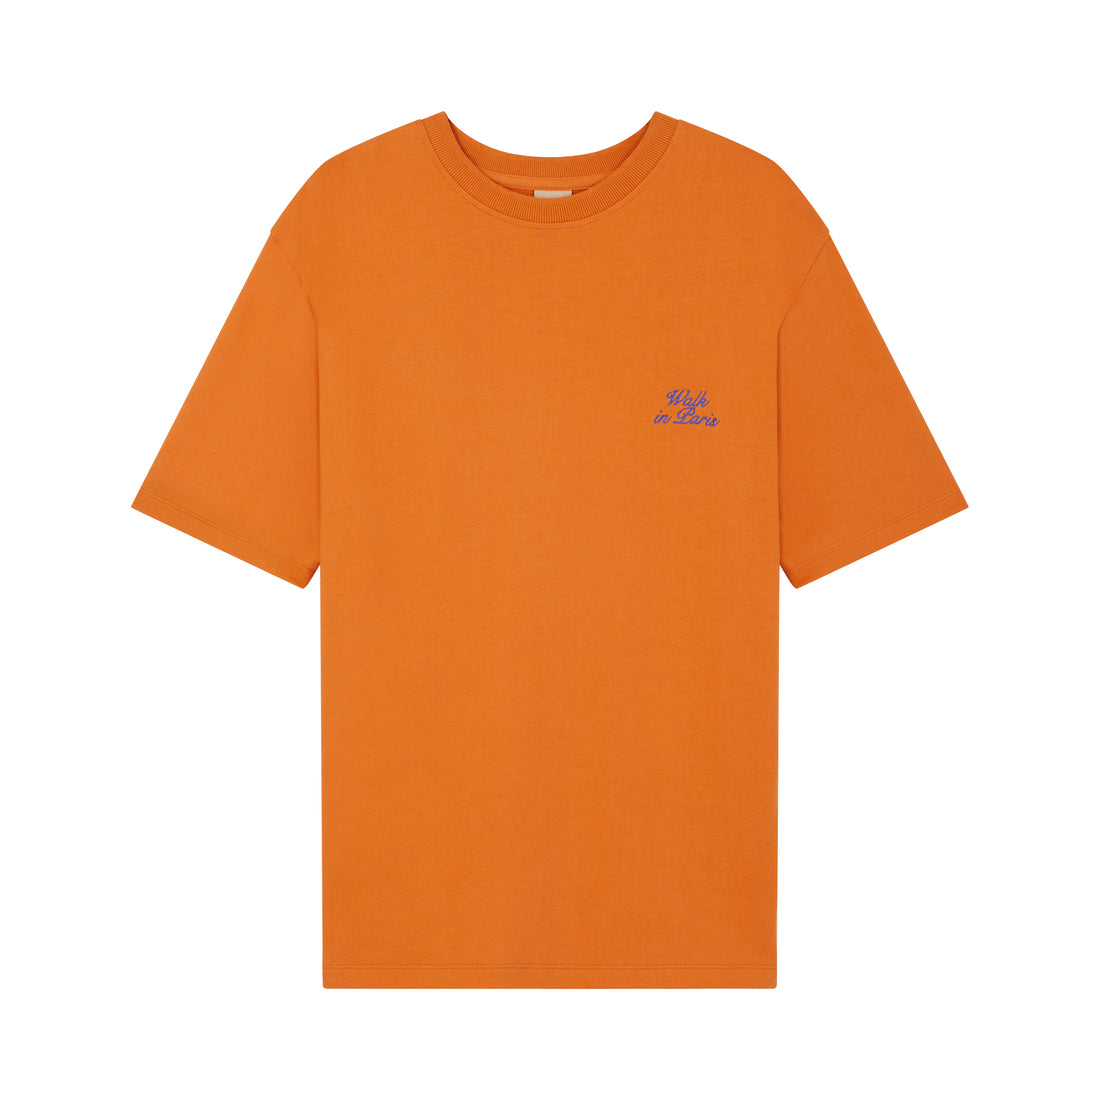 The tangerine embroidered t-shirt